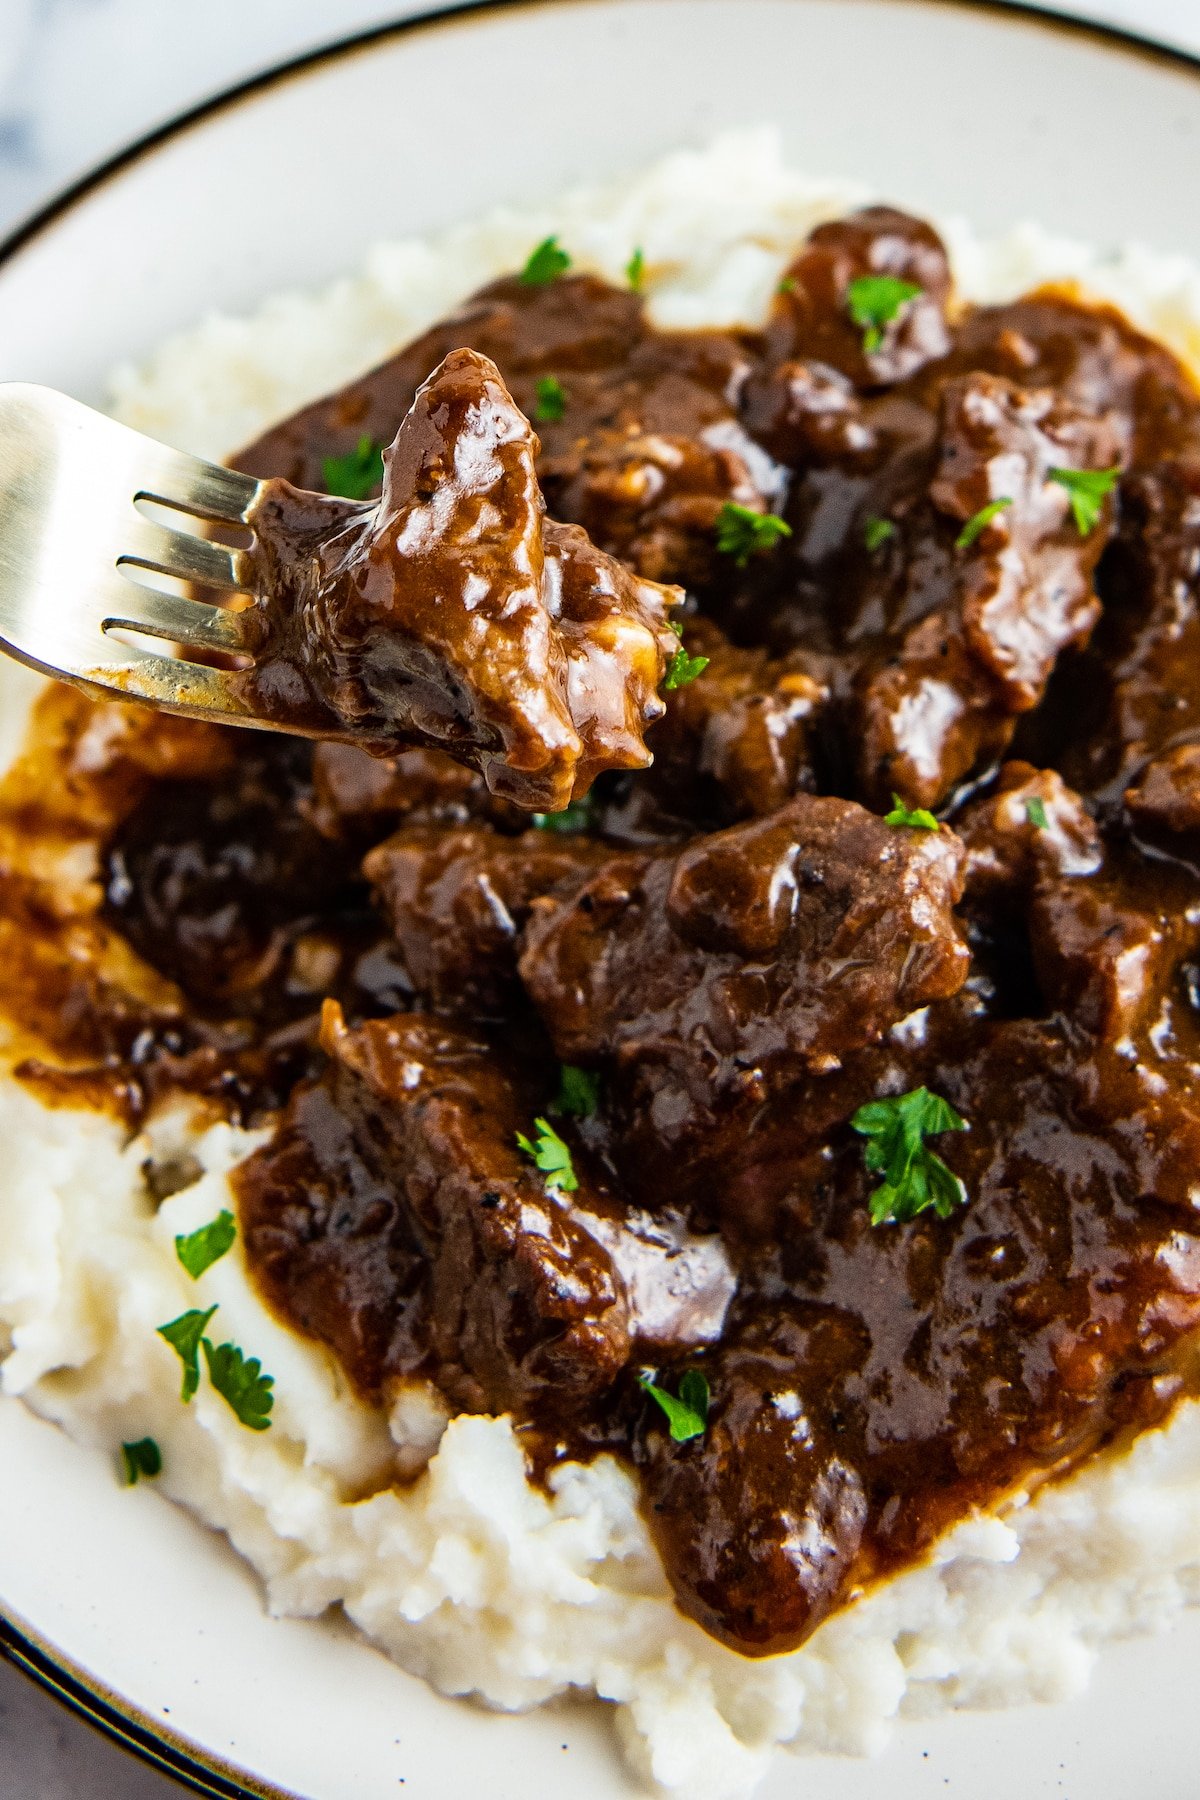 A fork lifting a bite of beef from a plate of beef tips in gravy on mashed potatoes.